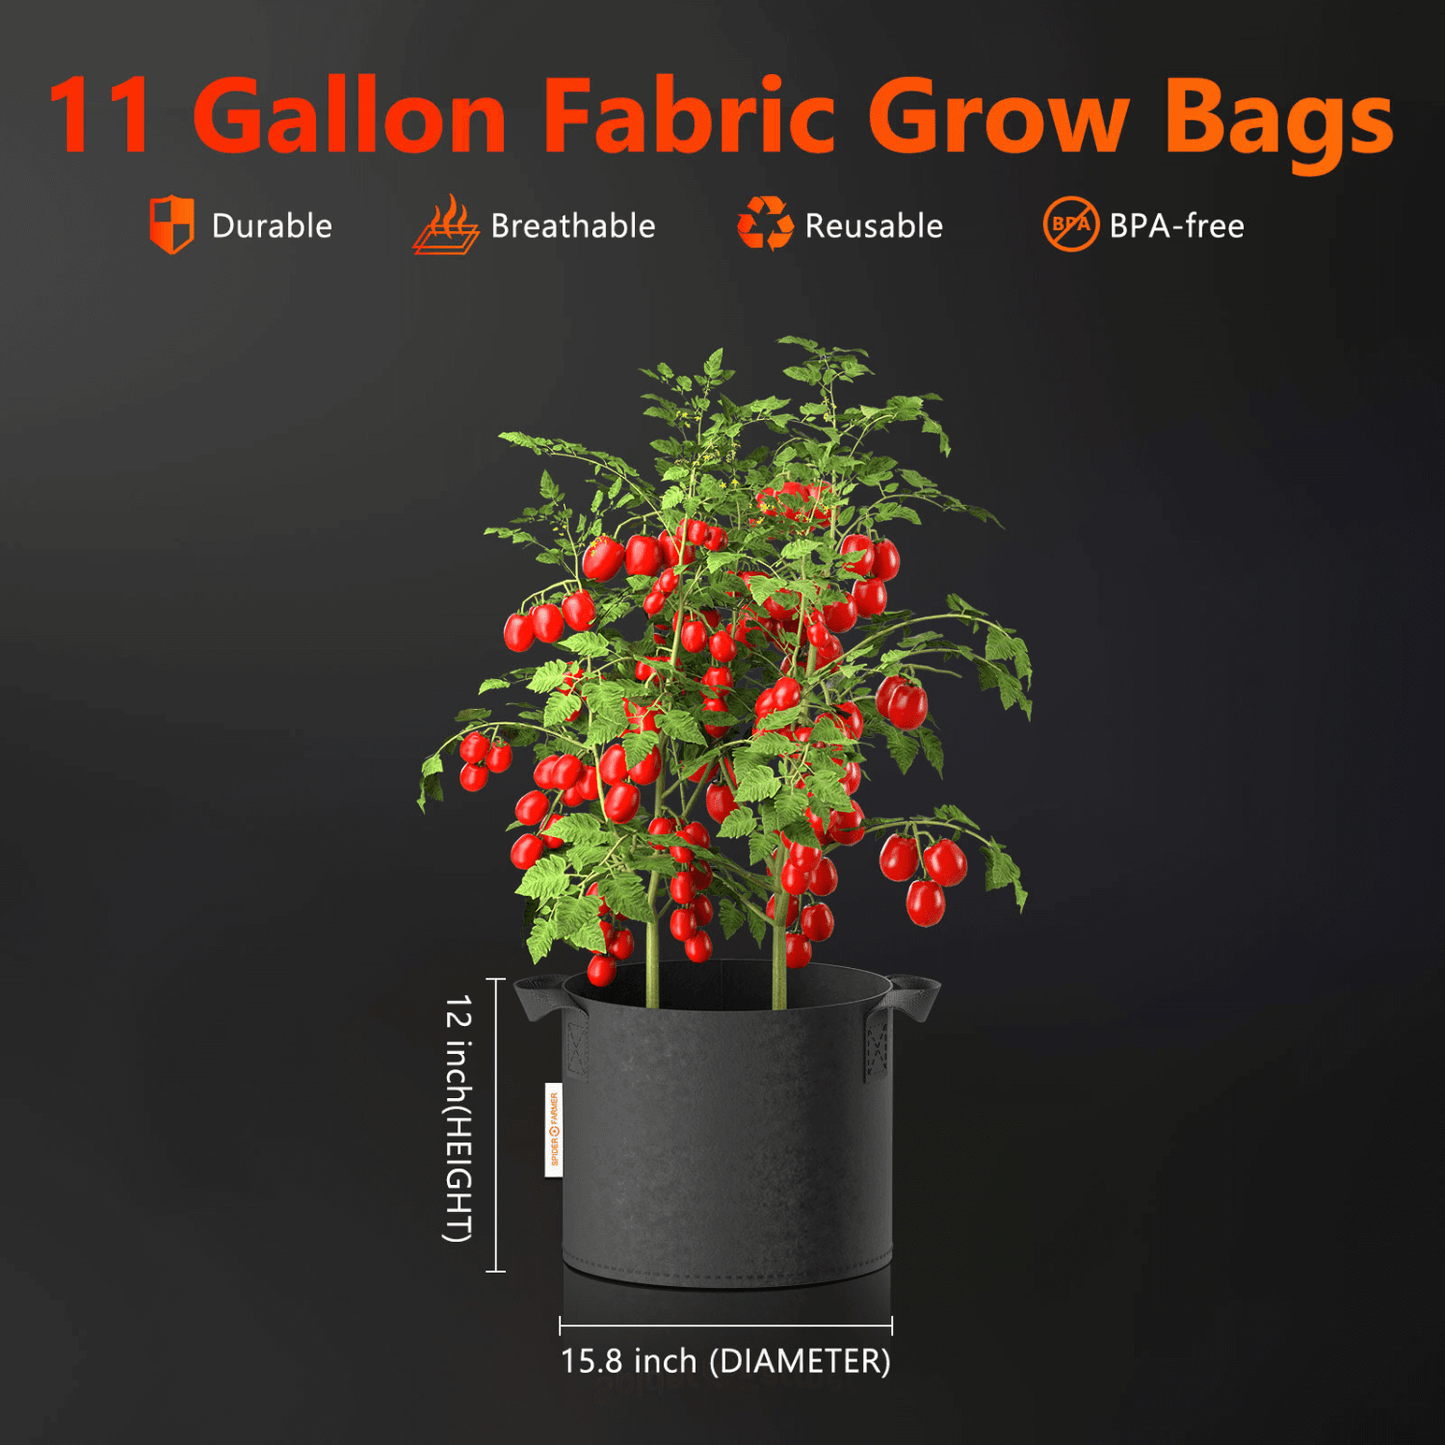 Spider Farmer 11 Gallon 300G Thickened Nonwover Fabric Grow Bag with Handles - 5-Pack SPIDER-SF-GROWBAG11-C Planting & Watering